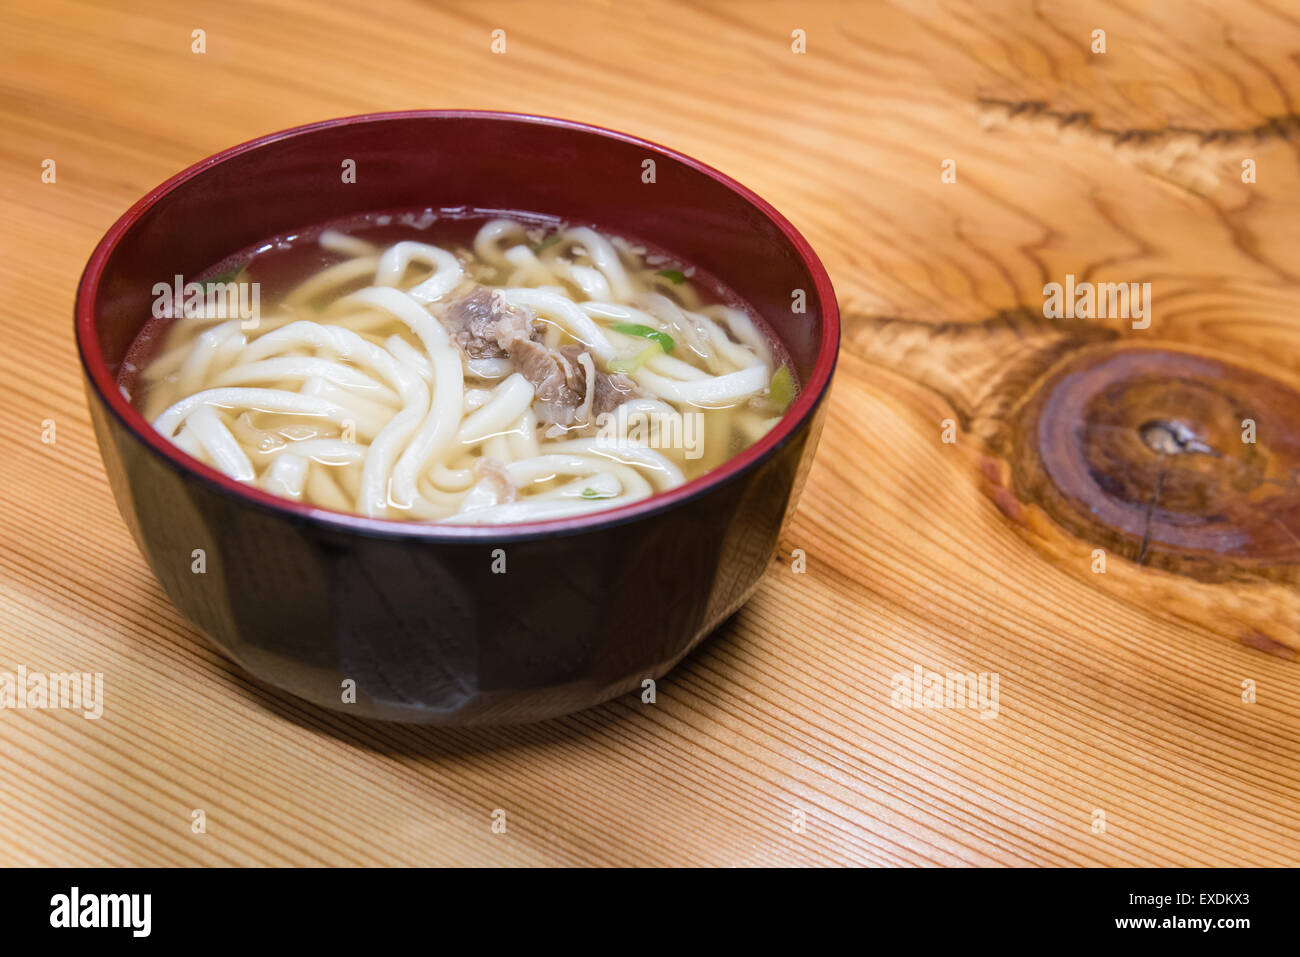 A red and black wooden bowl of Japanese udon noodles and meat. Stock Photo